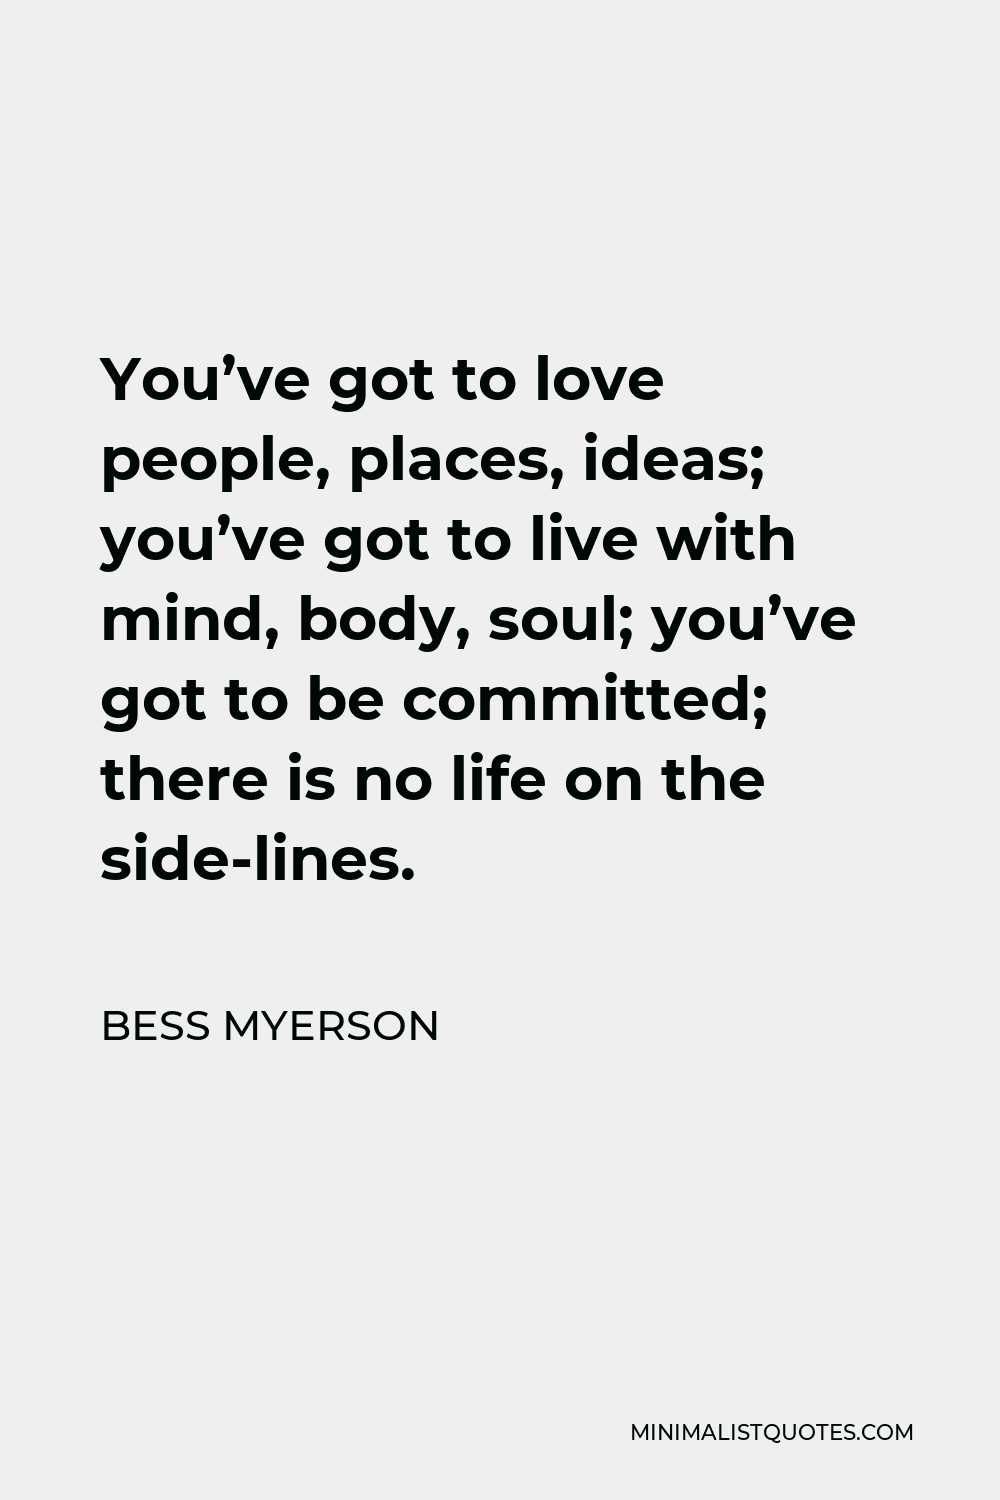 Bess Myerson Quote - You’ve got to love people, places, ideas; you’ve got to live with mind, body, soul; you’ve got to be committed; there is no life on the side-lines.